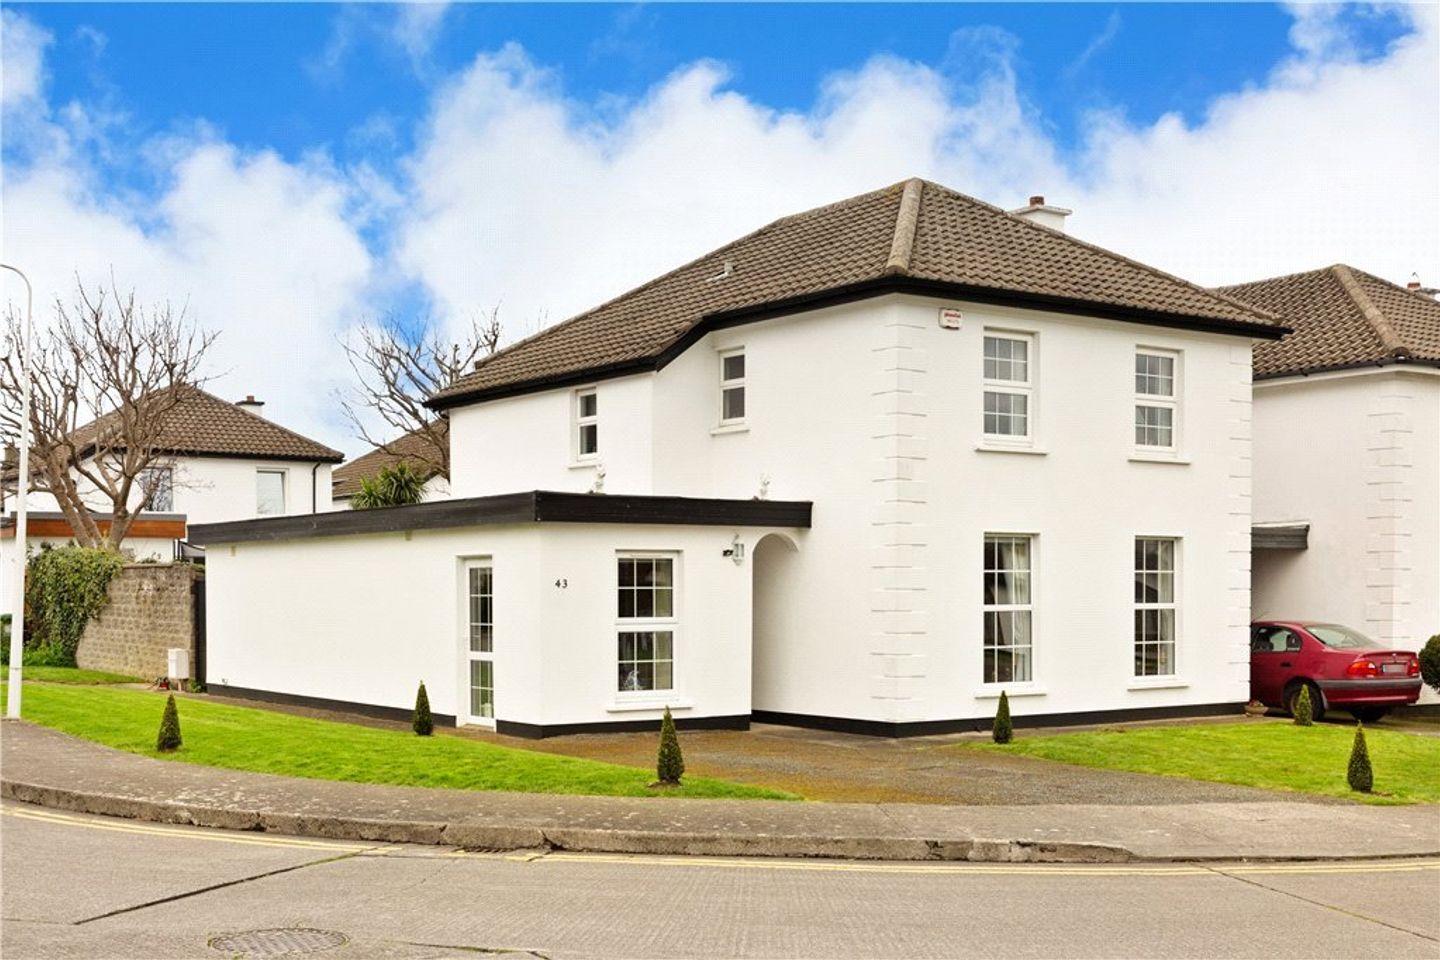 43 Castle Court Booterstown, Booterstown, Co. Dublin, A94X0H2